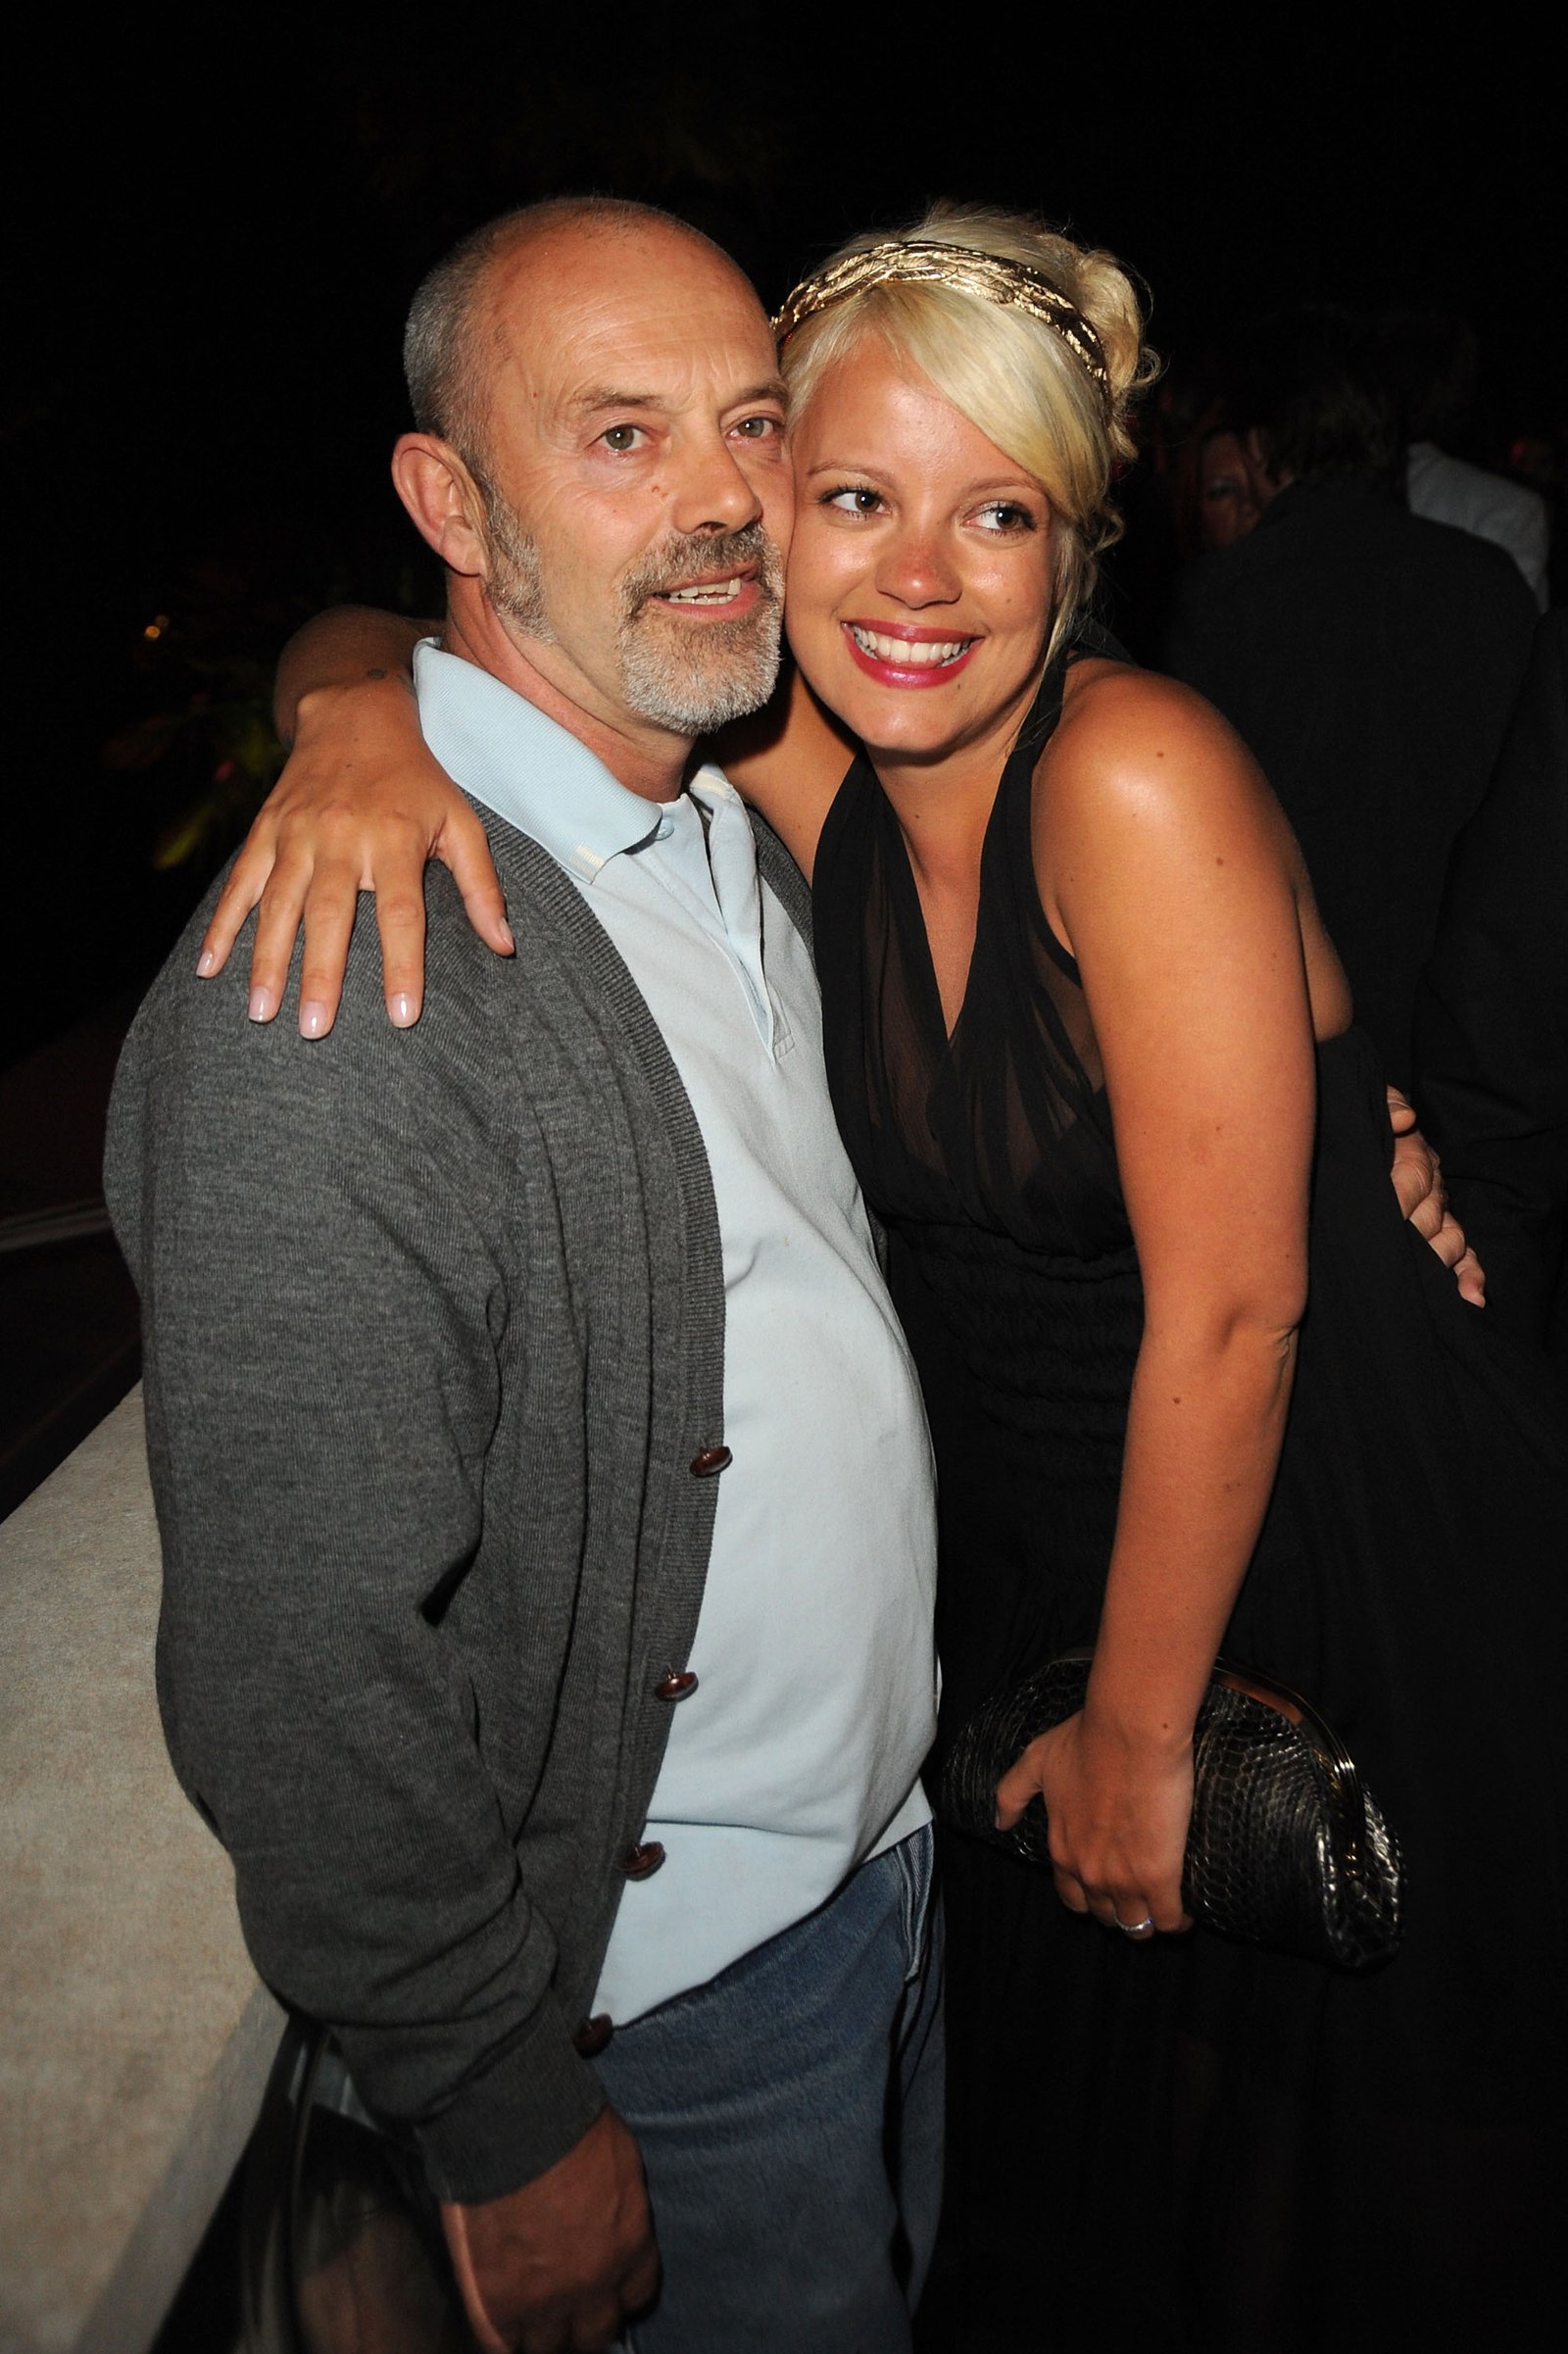 Keith Allen called the police when he discovered his daughter Lily Allen wasn't in her hotel room the family had been staying at during a holiday.